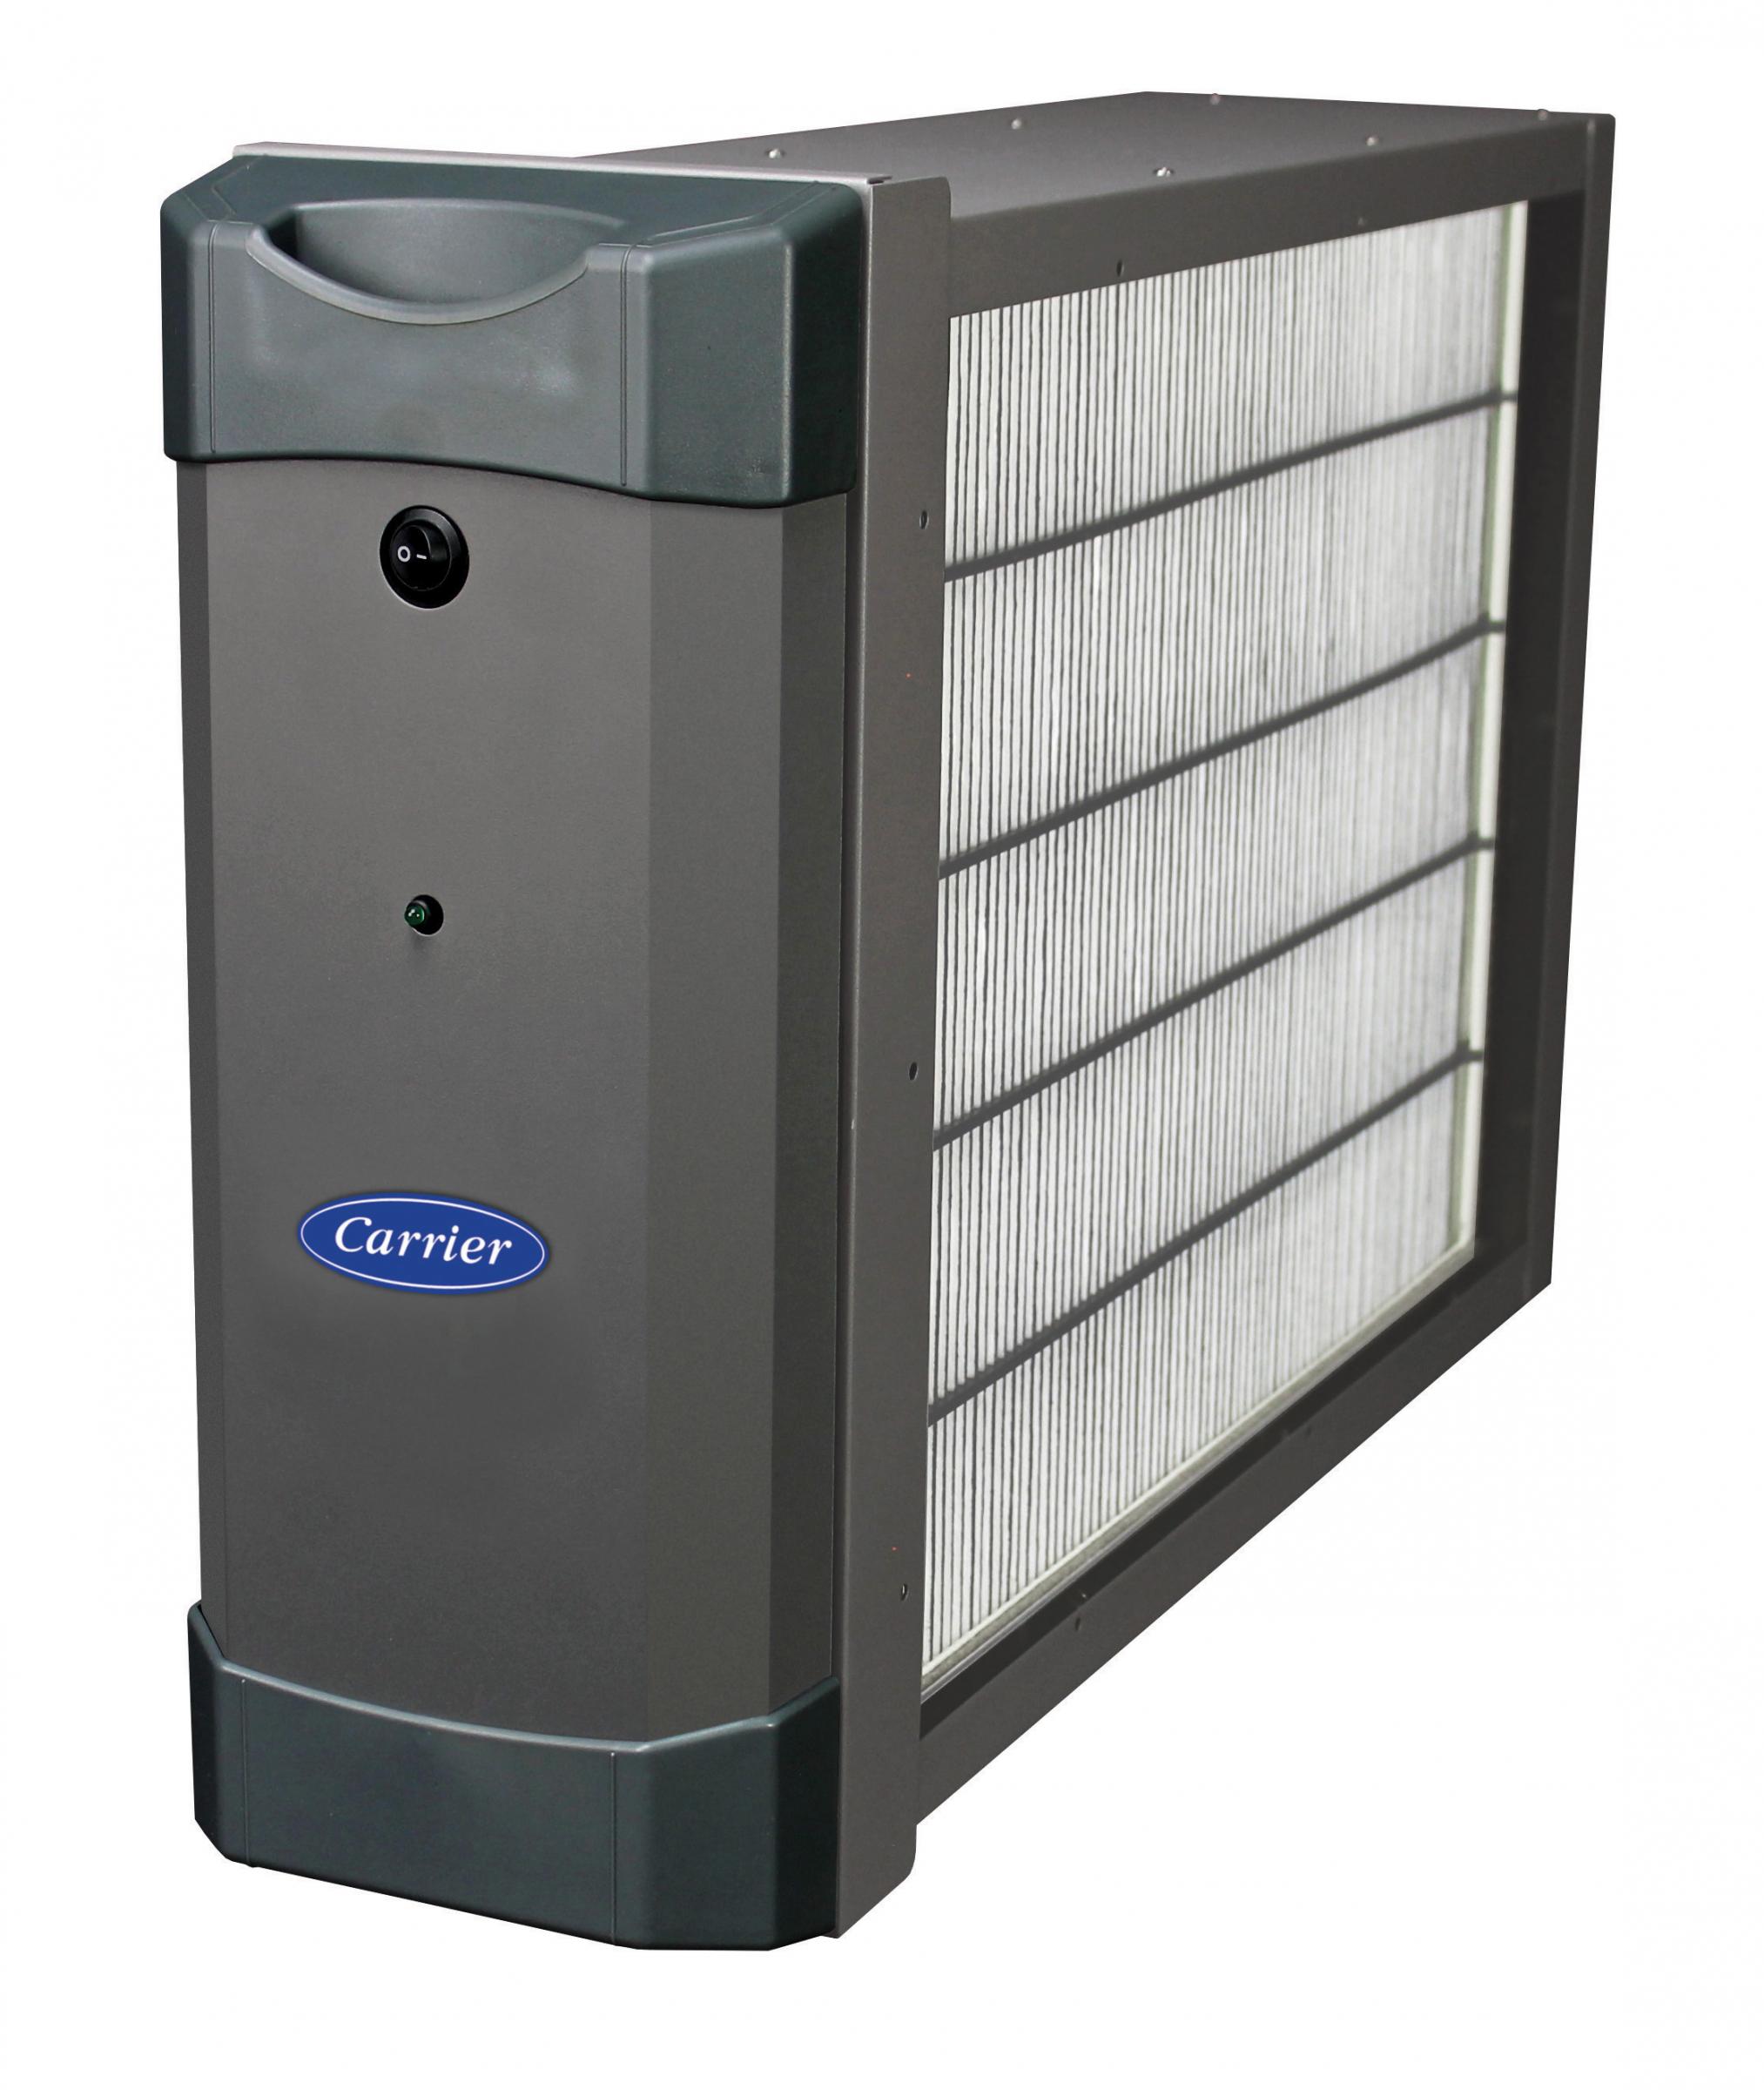 Tempe AC Air Filter Cleaning